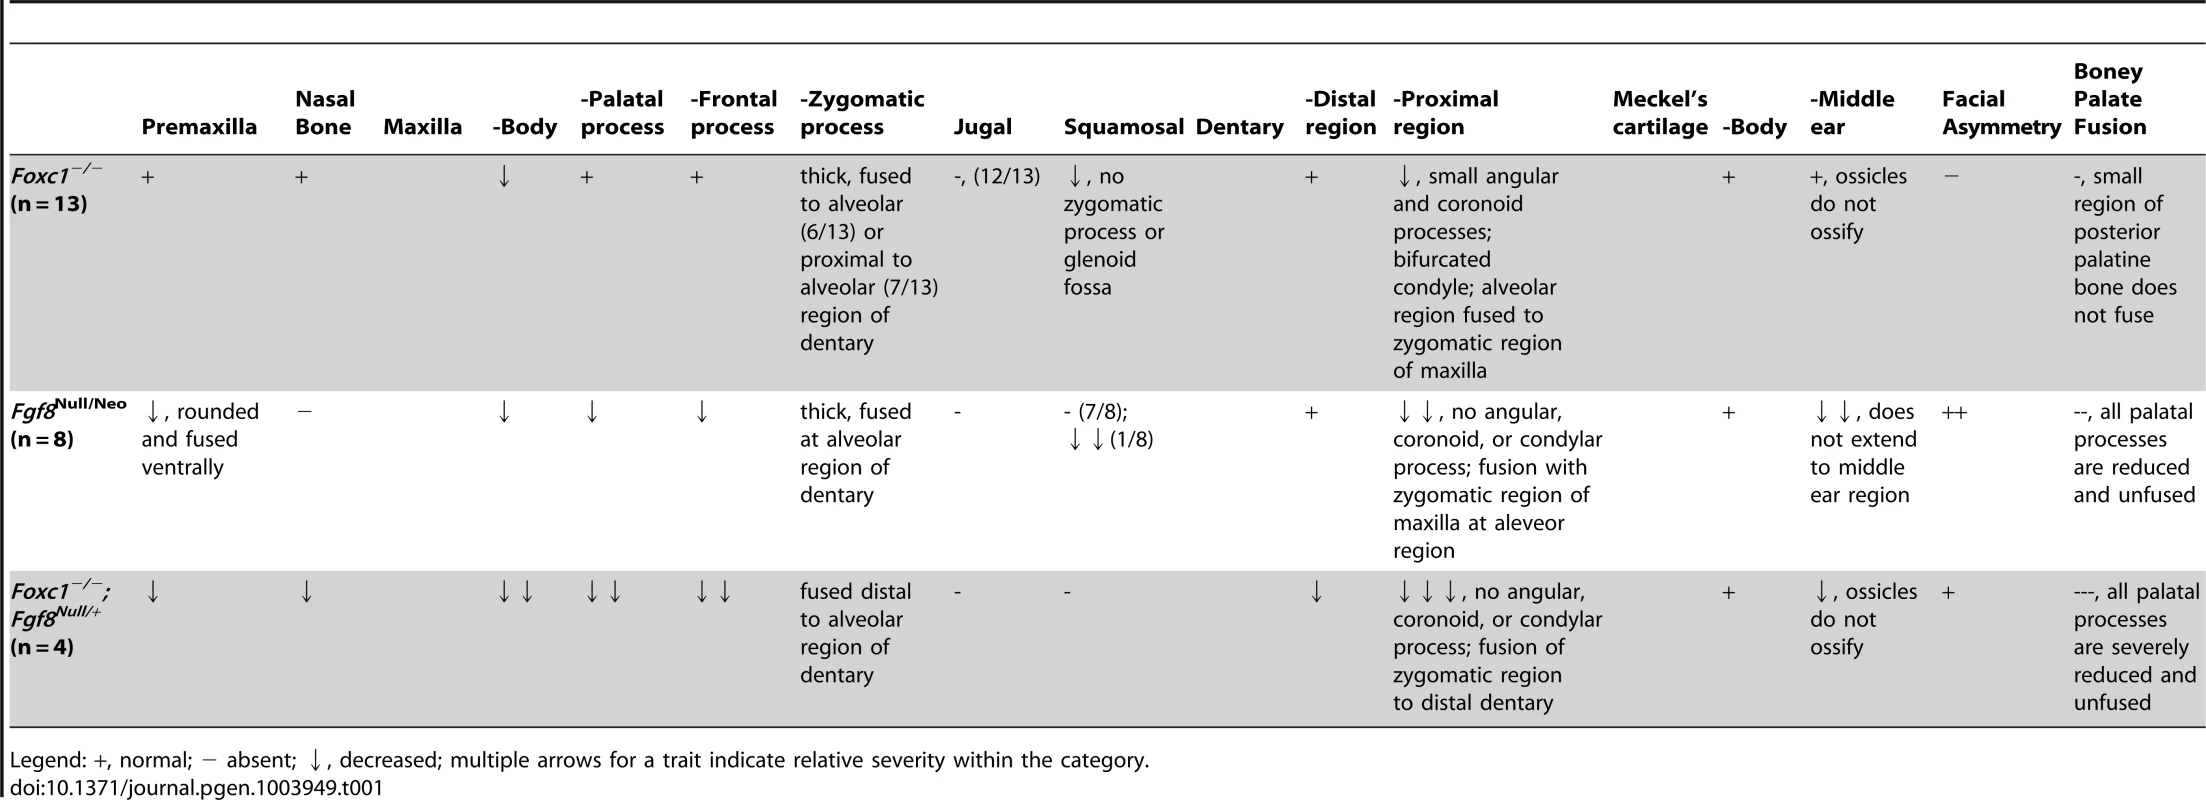 Summary of skeletal phenotypes in jaw related structures.